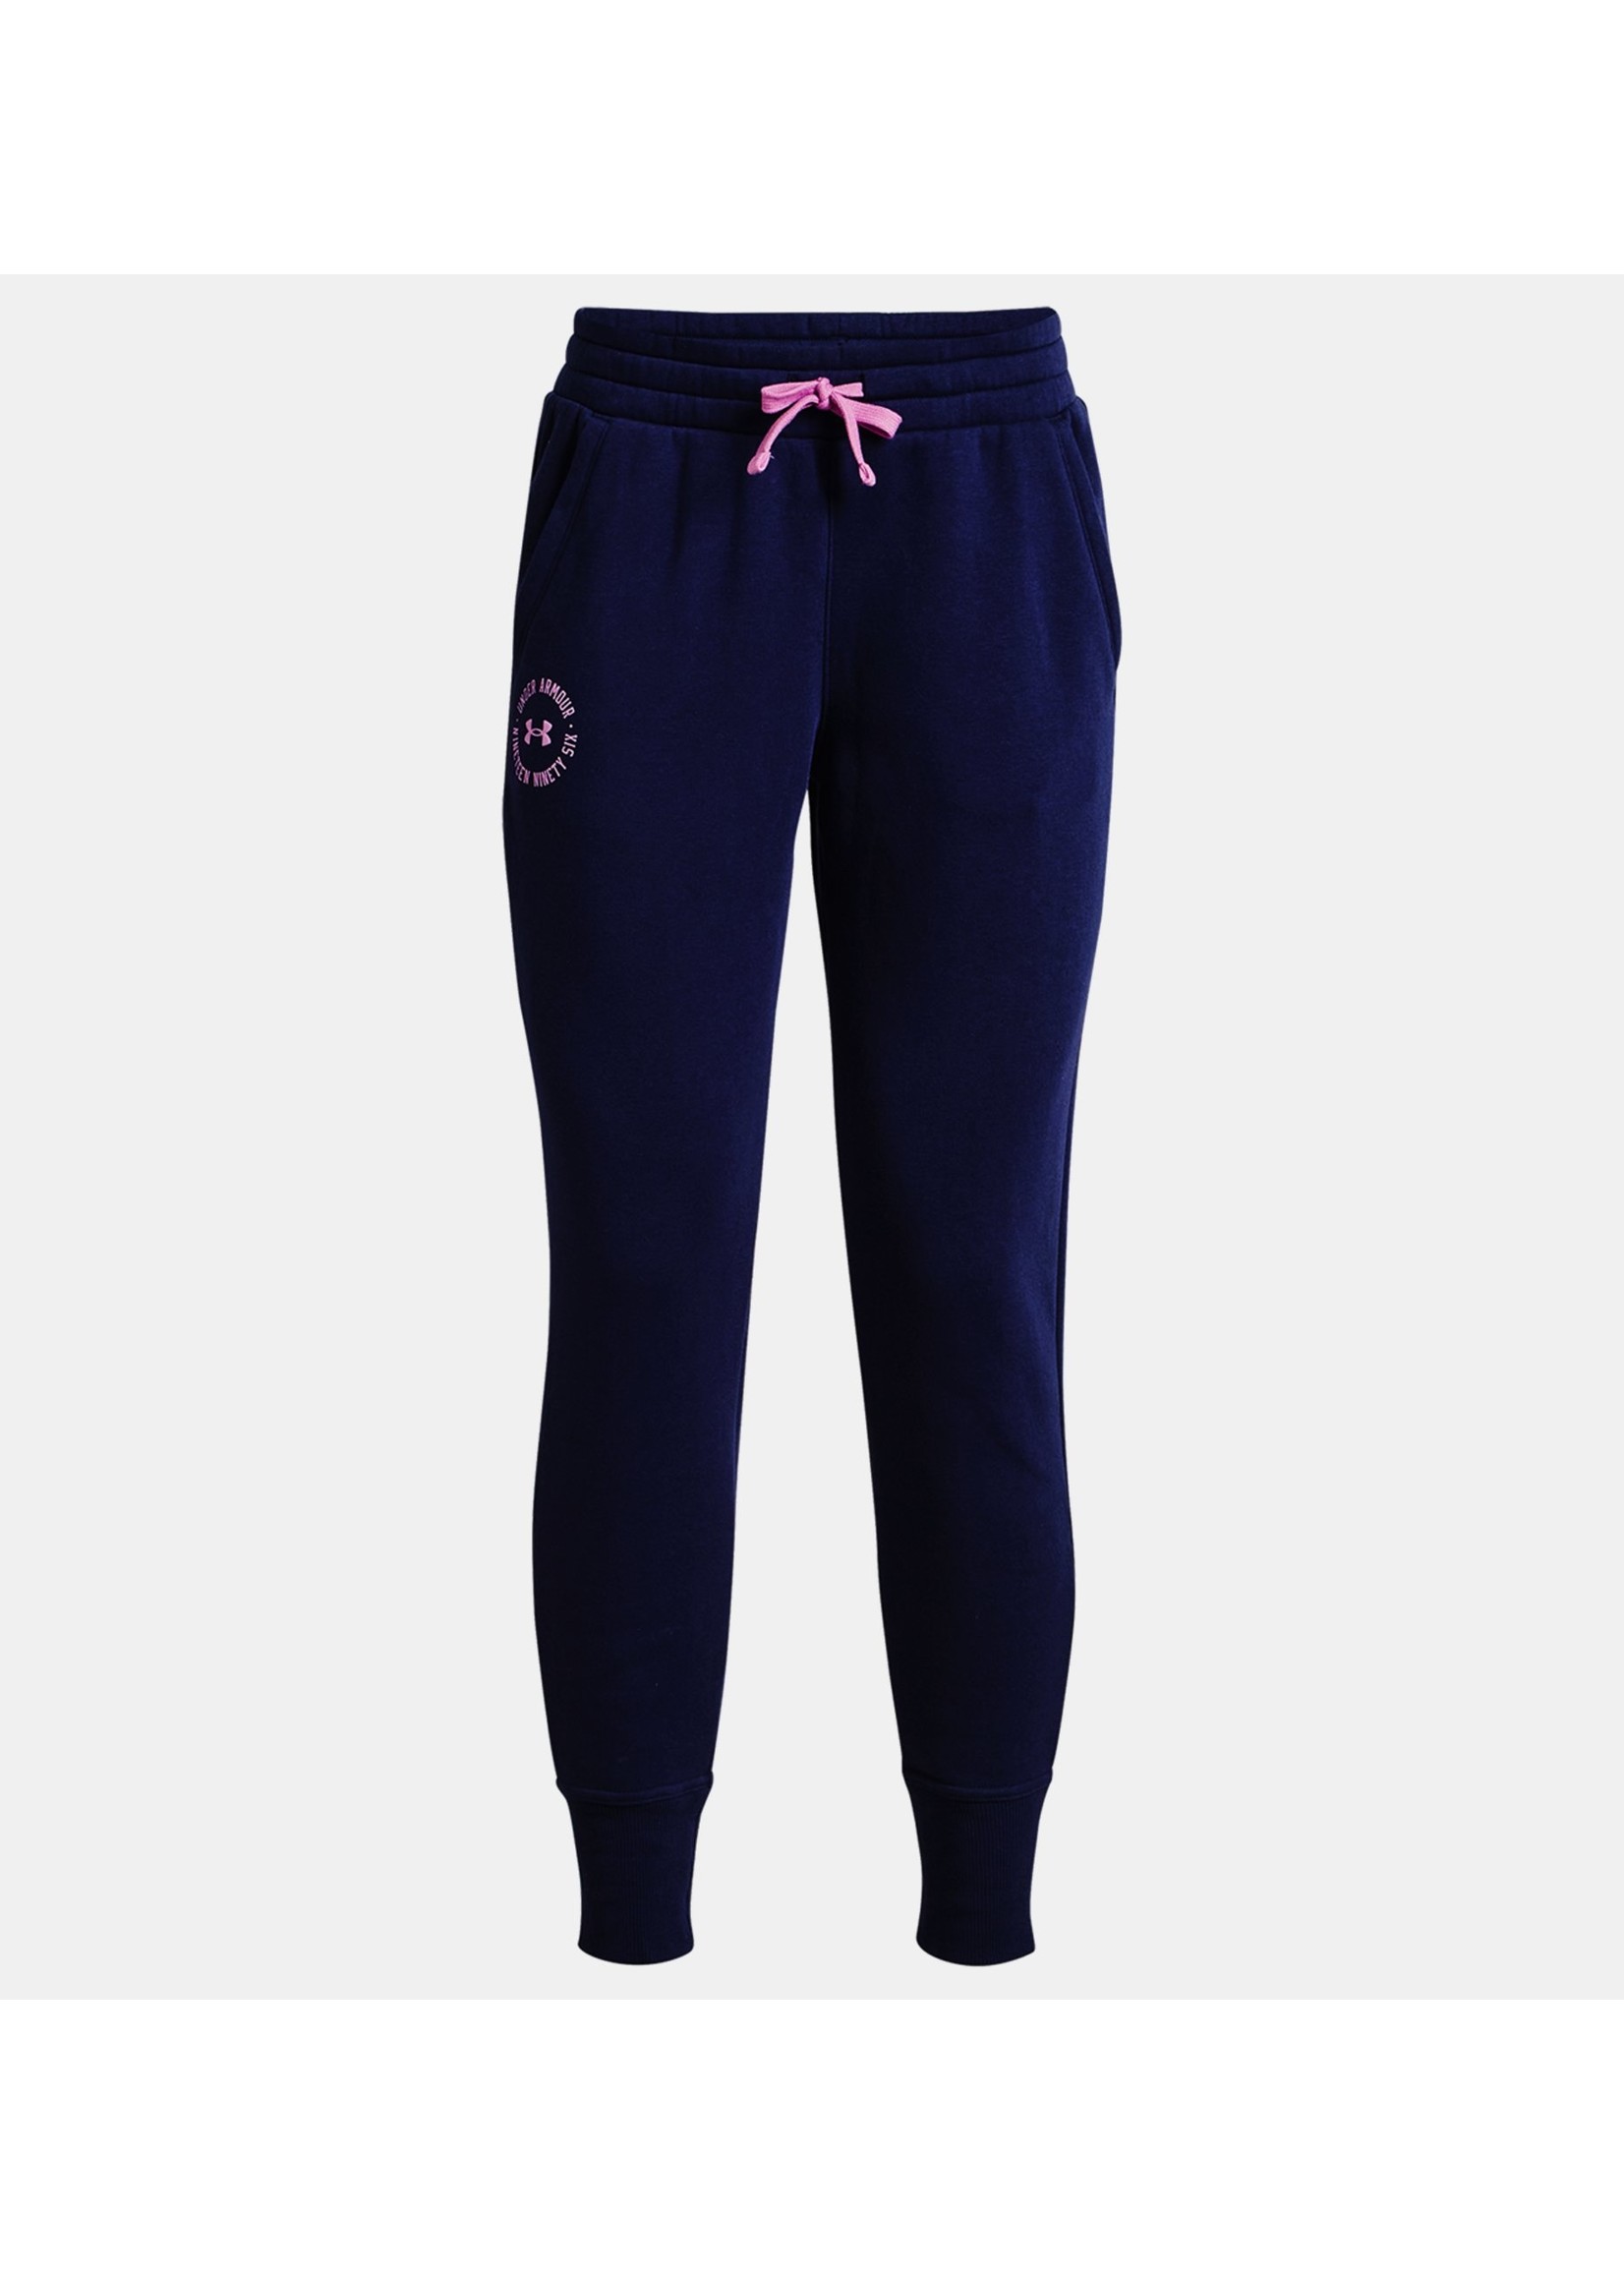 Under Armour - Womens Rival Crest Joggers Pants, Color Midnight  Navy/Jellyfish (410), Size: Medium